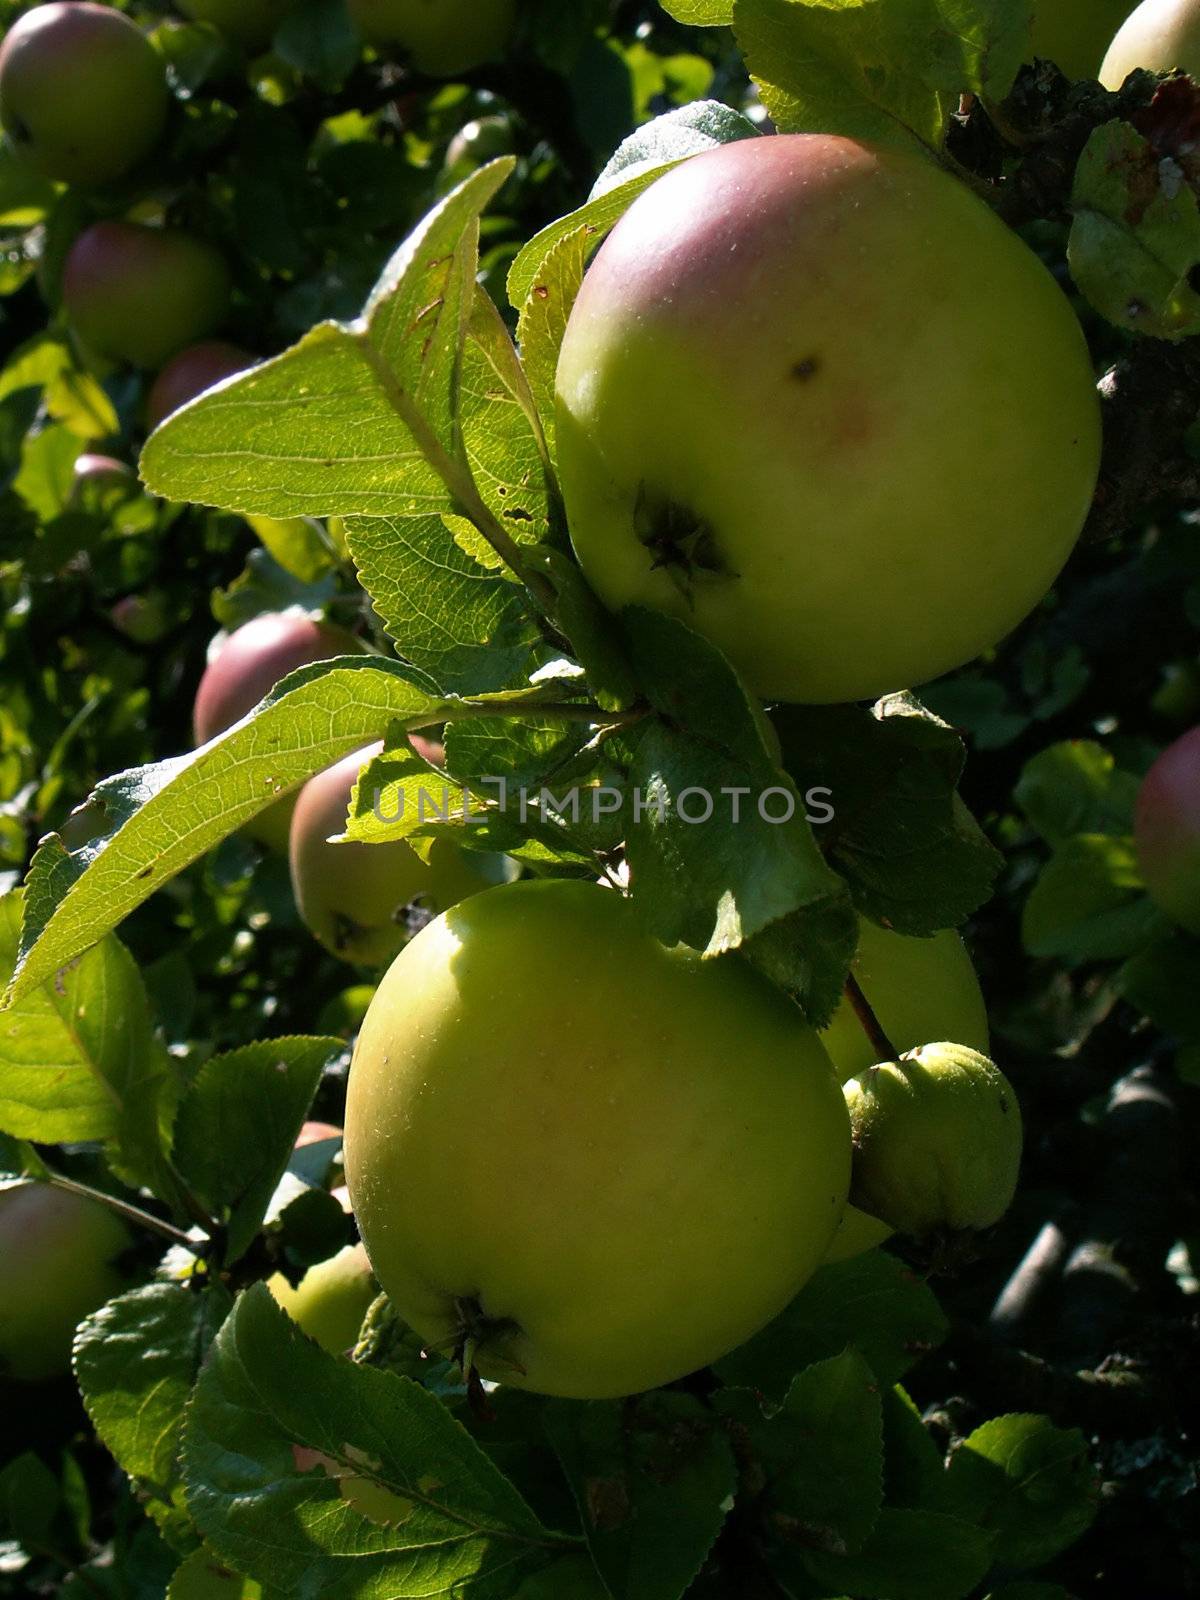 picture of a apples